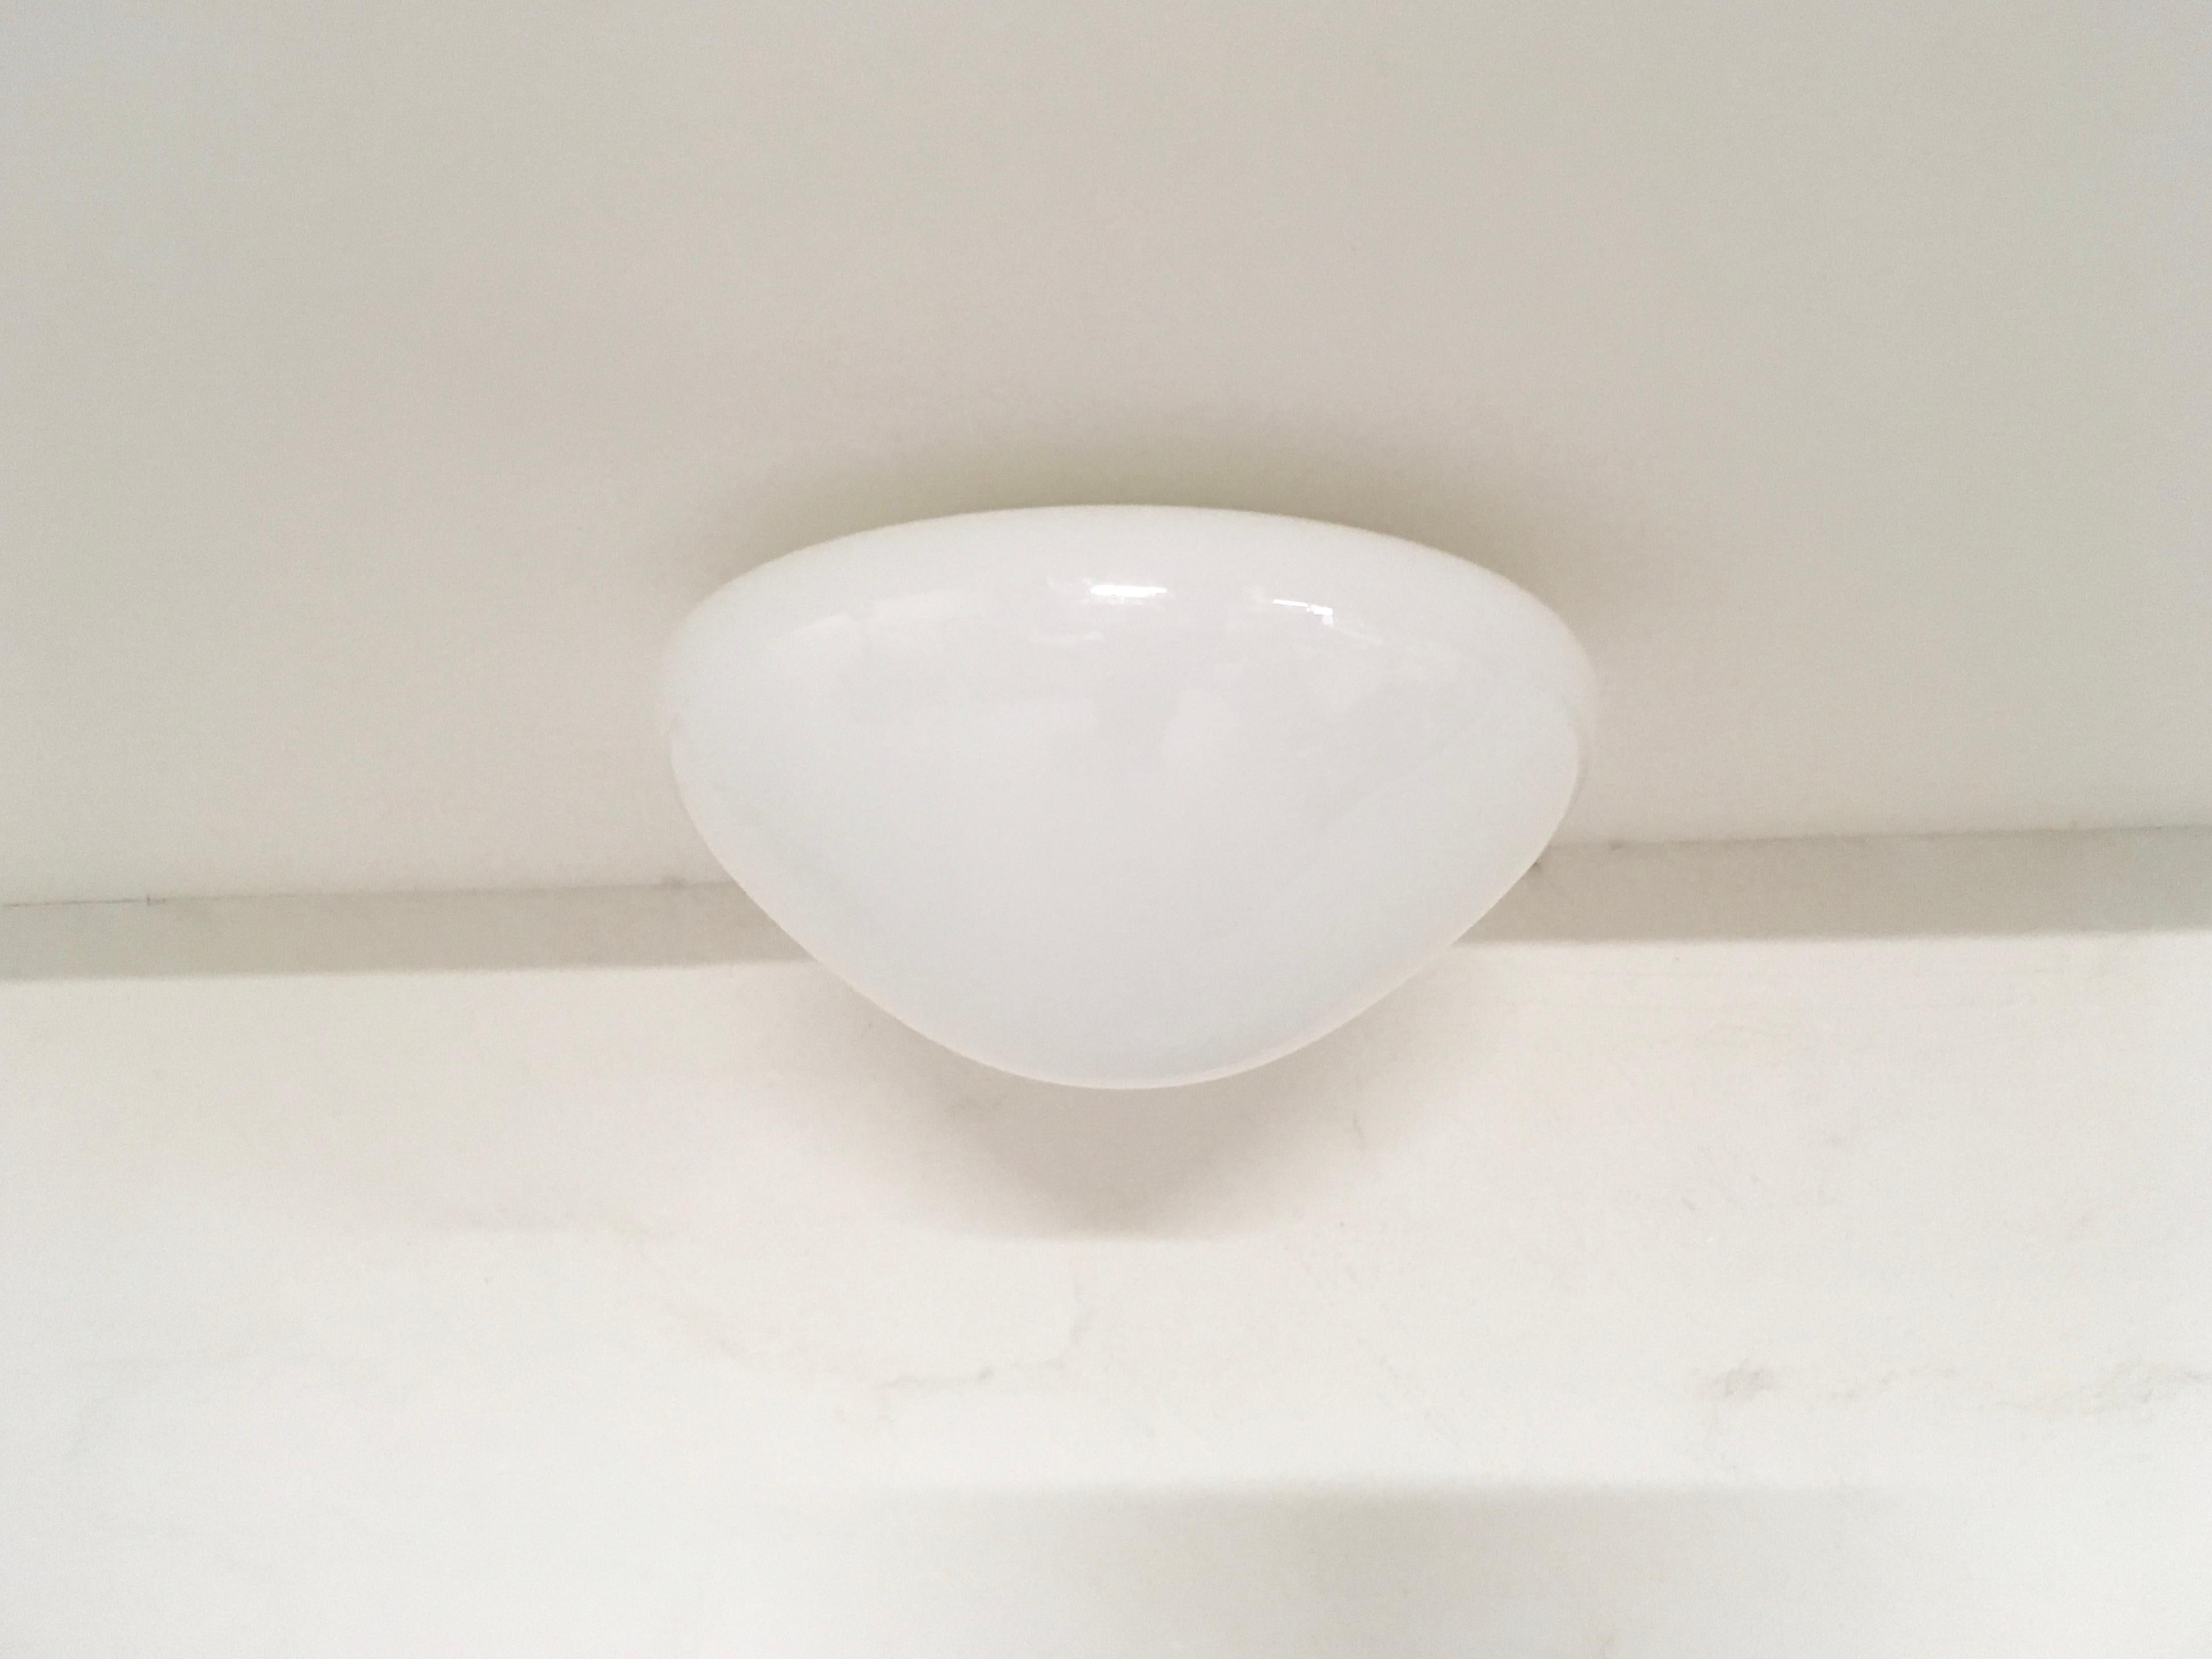 Mid-20th Century Bauhaus Wagenfeld Wall Sconce or Ceiling Light, Germany, 1955 For Sale